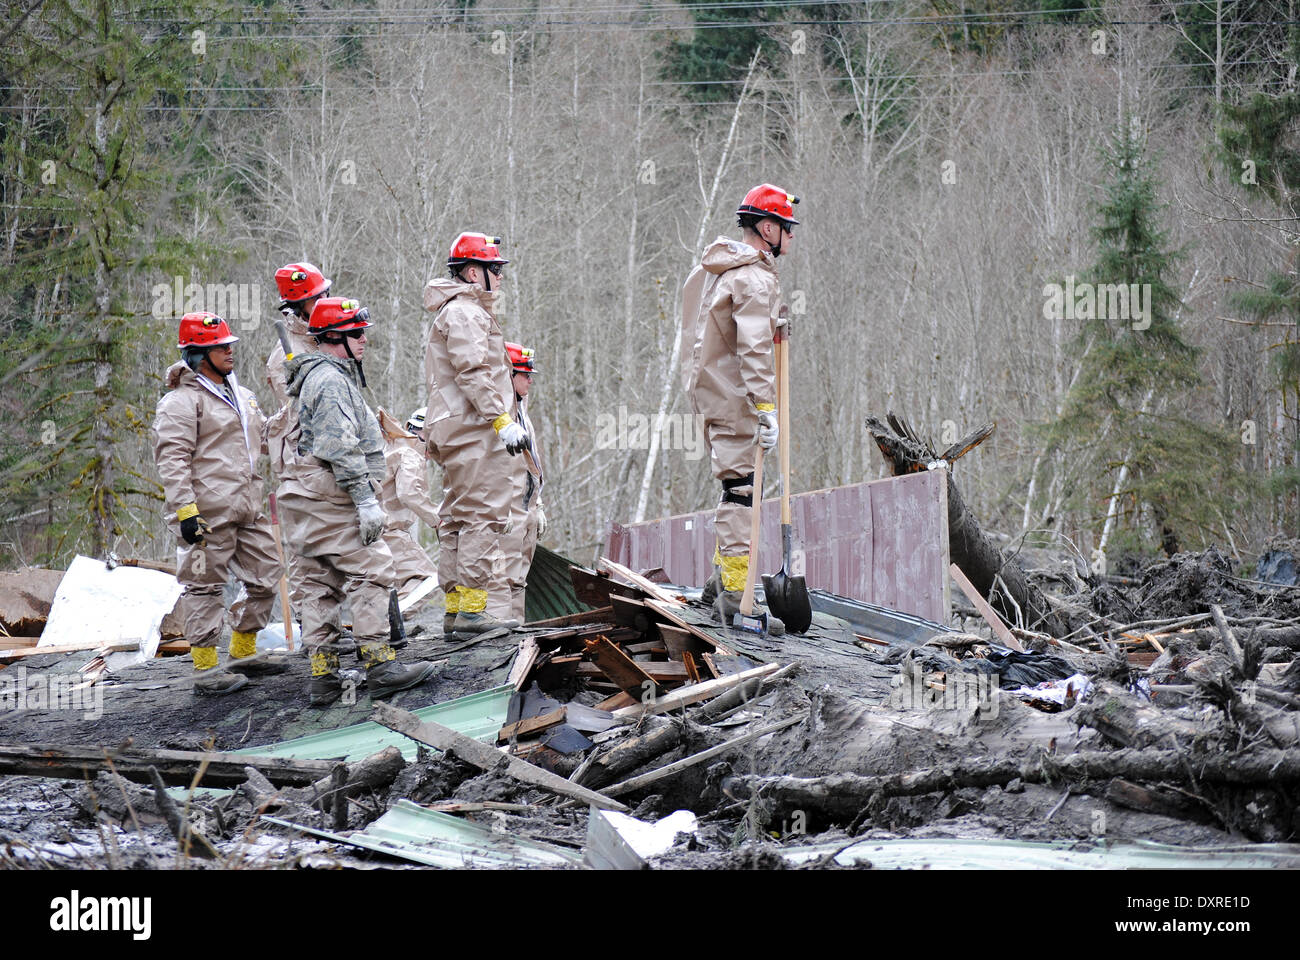 Rescue workers continue efforts to locate victims of a massive landslide that killed at least 28 people and destroyed a small riverside village in northwestern Washington state March 26, 2014 in Oso, Washington. Stock Photo